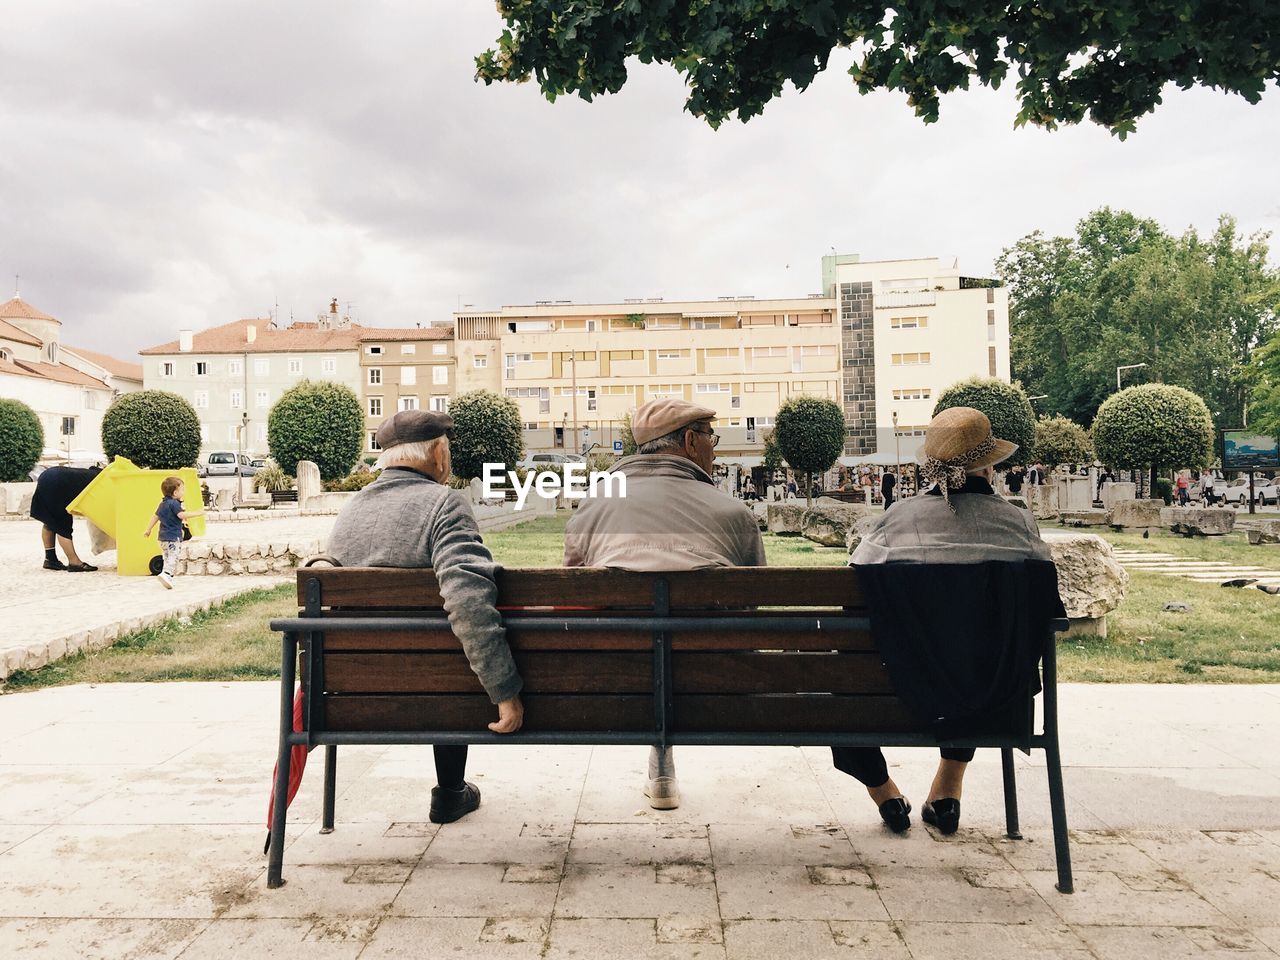 REAR VIEW OF PEOPLE SITTING ON BENCH AGAINST BUILDINGS